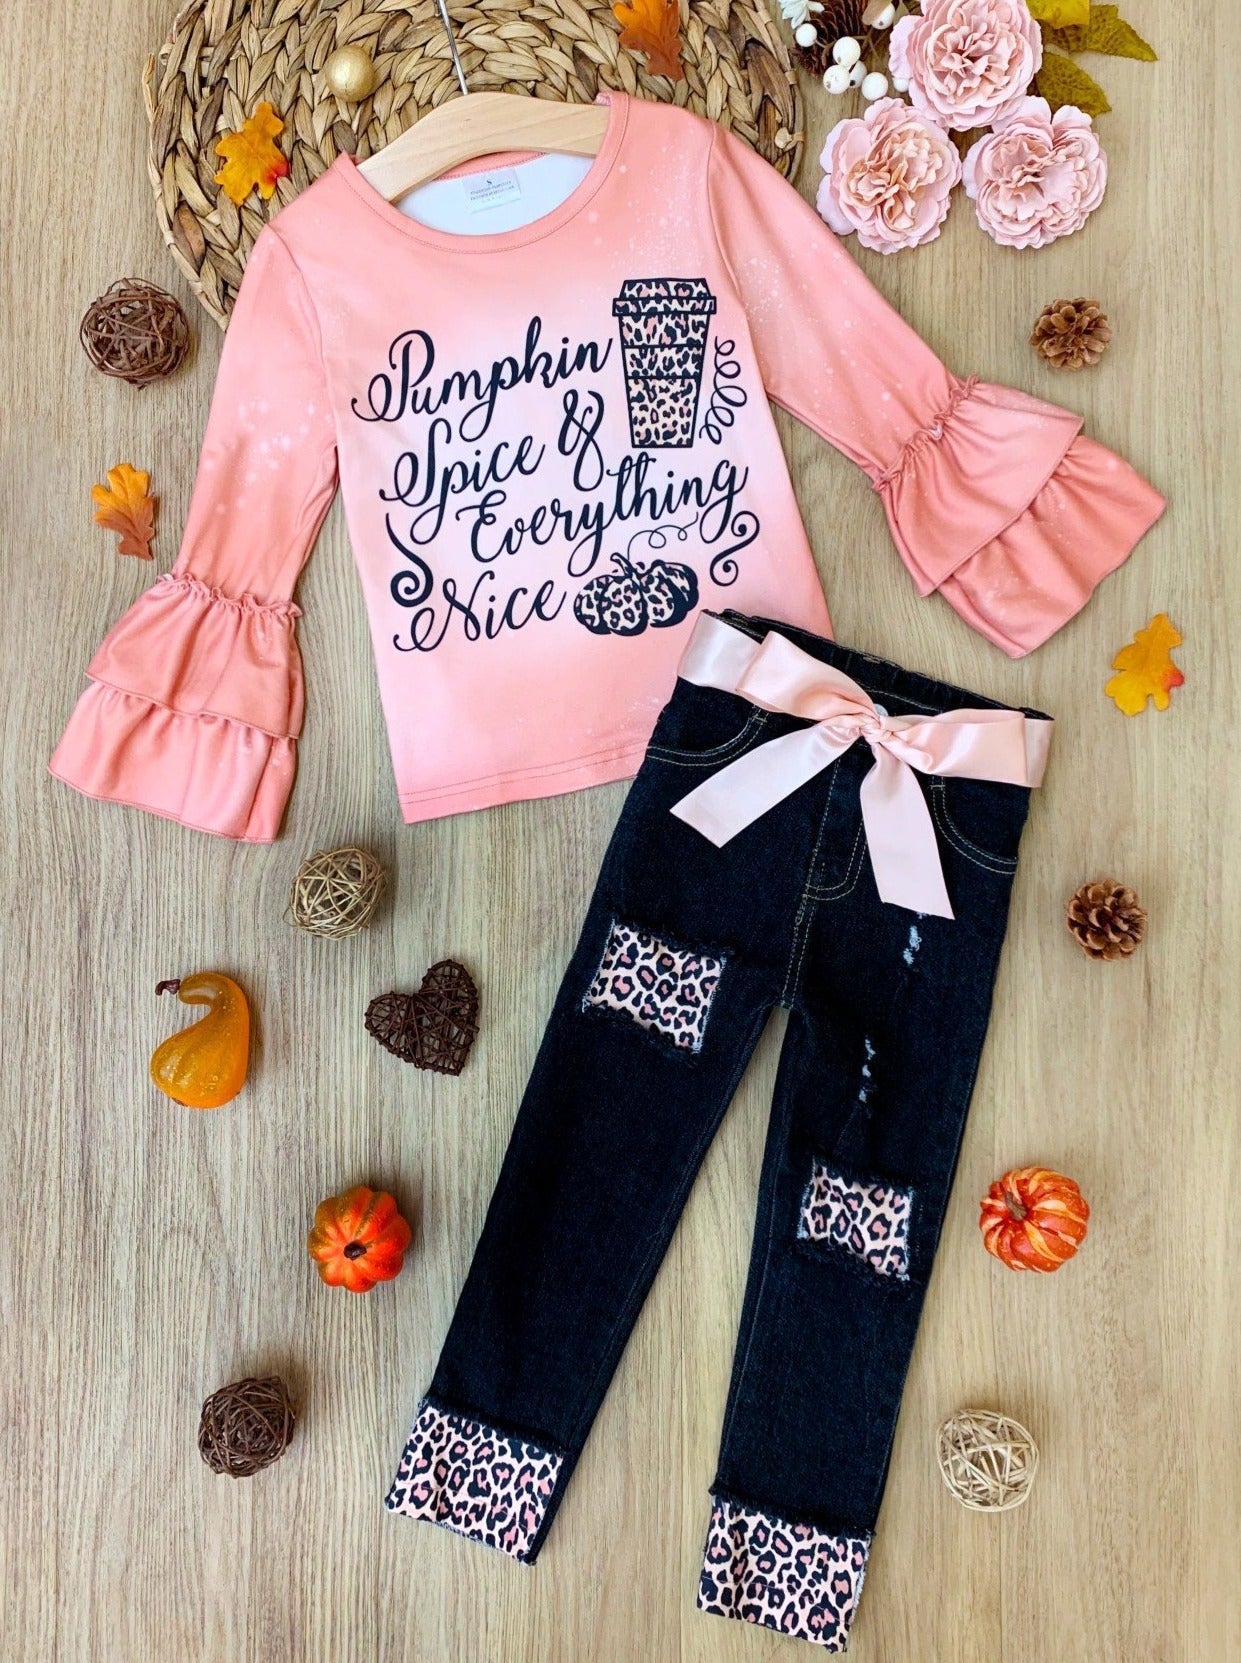 Little girls long-sleeve top with "Pumpkin Spice & Everything Nice" graphic print, double ruffle cuffs and leopard print patched jeans with sash belt - Mia Belle Girls